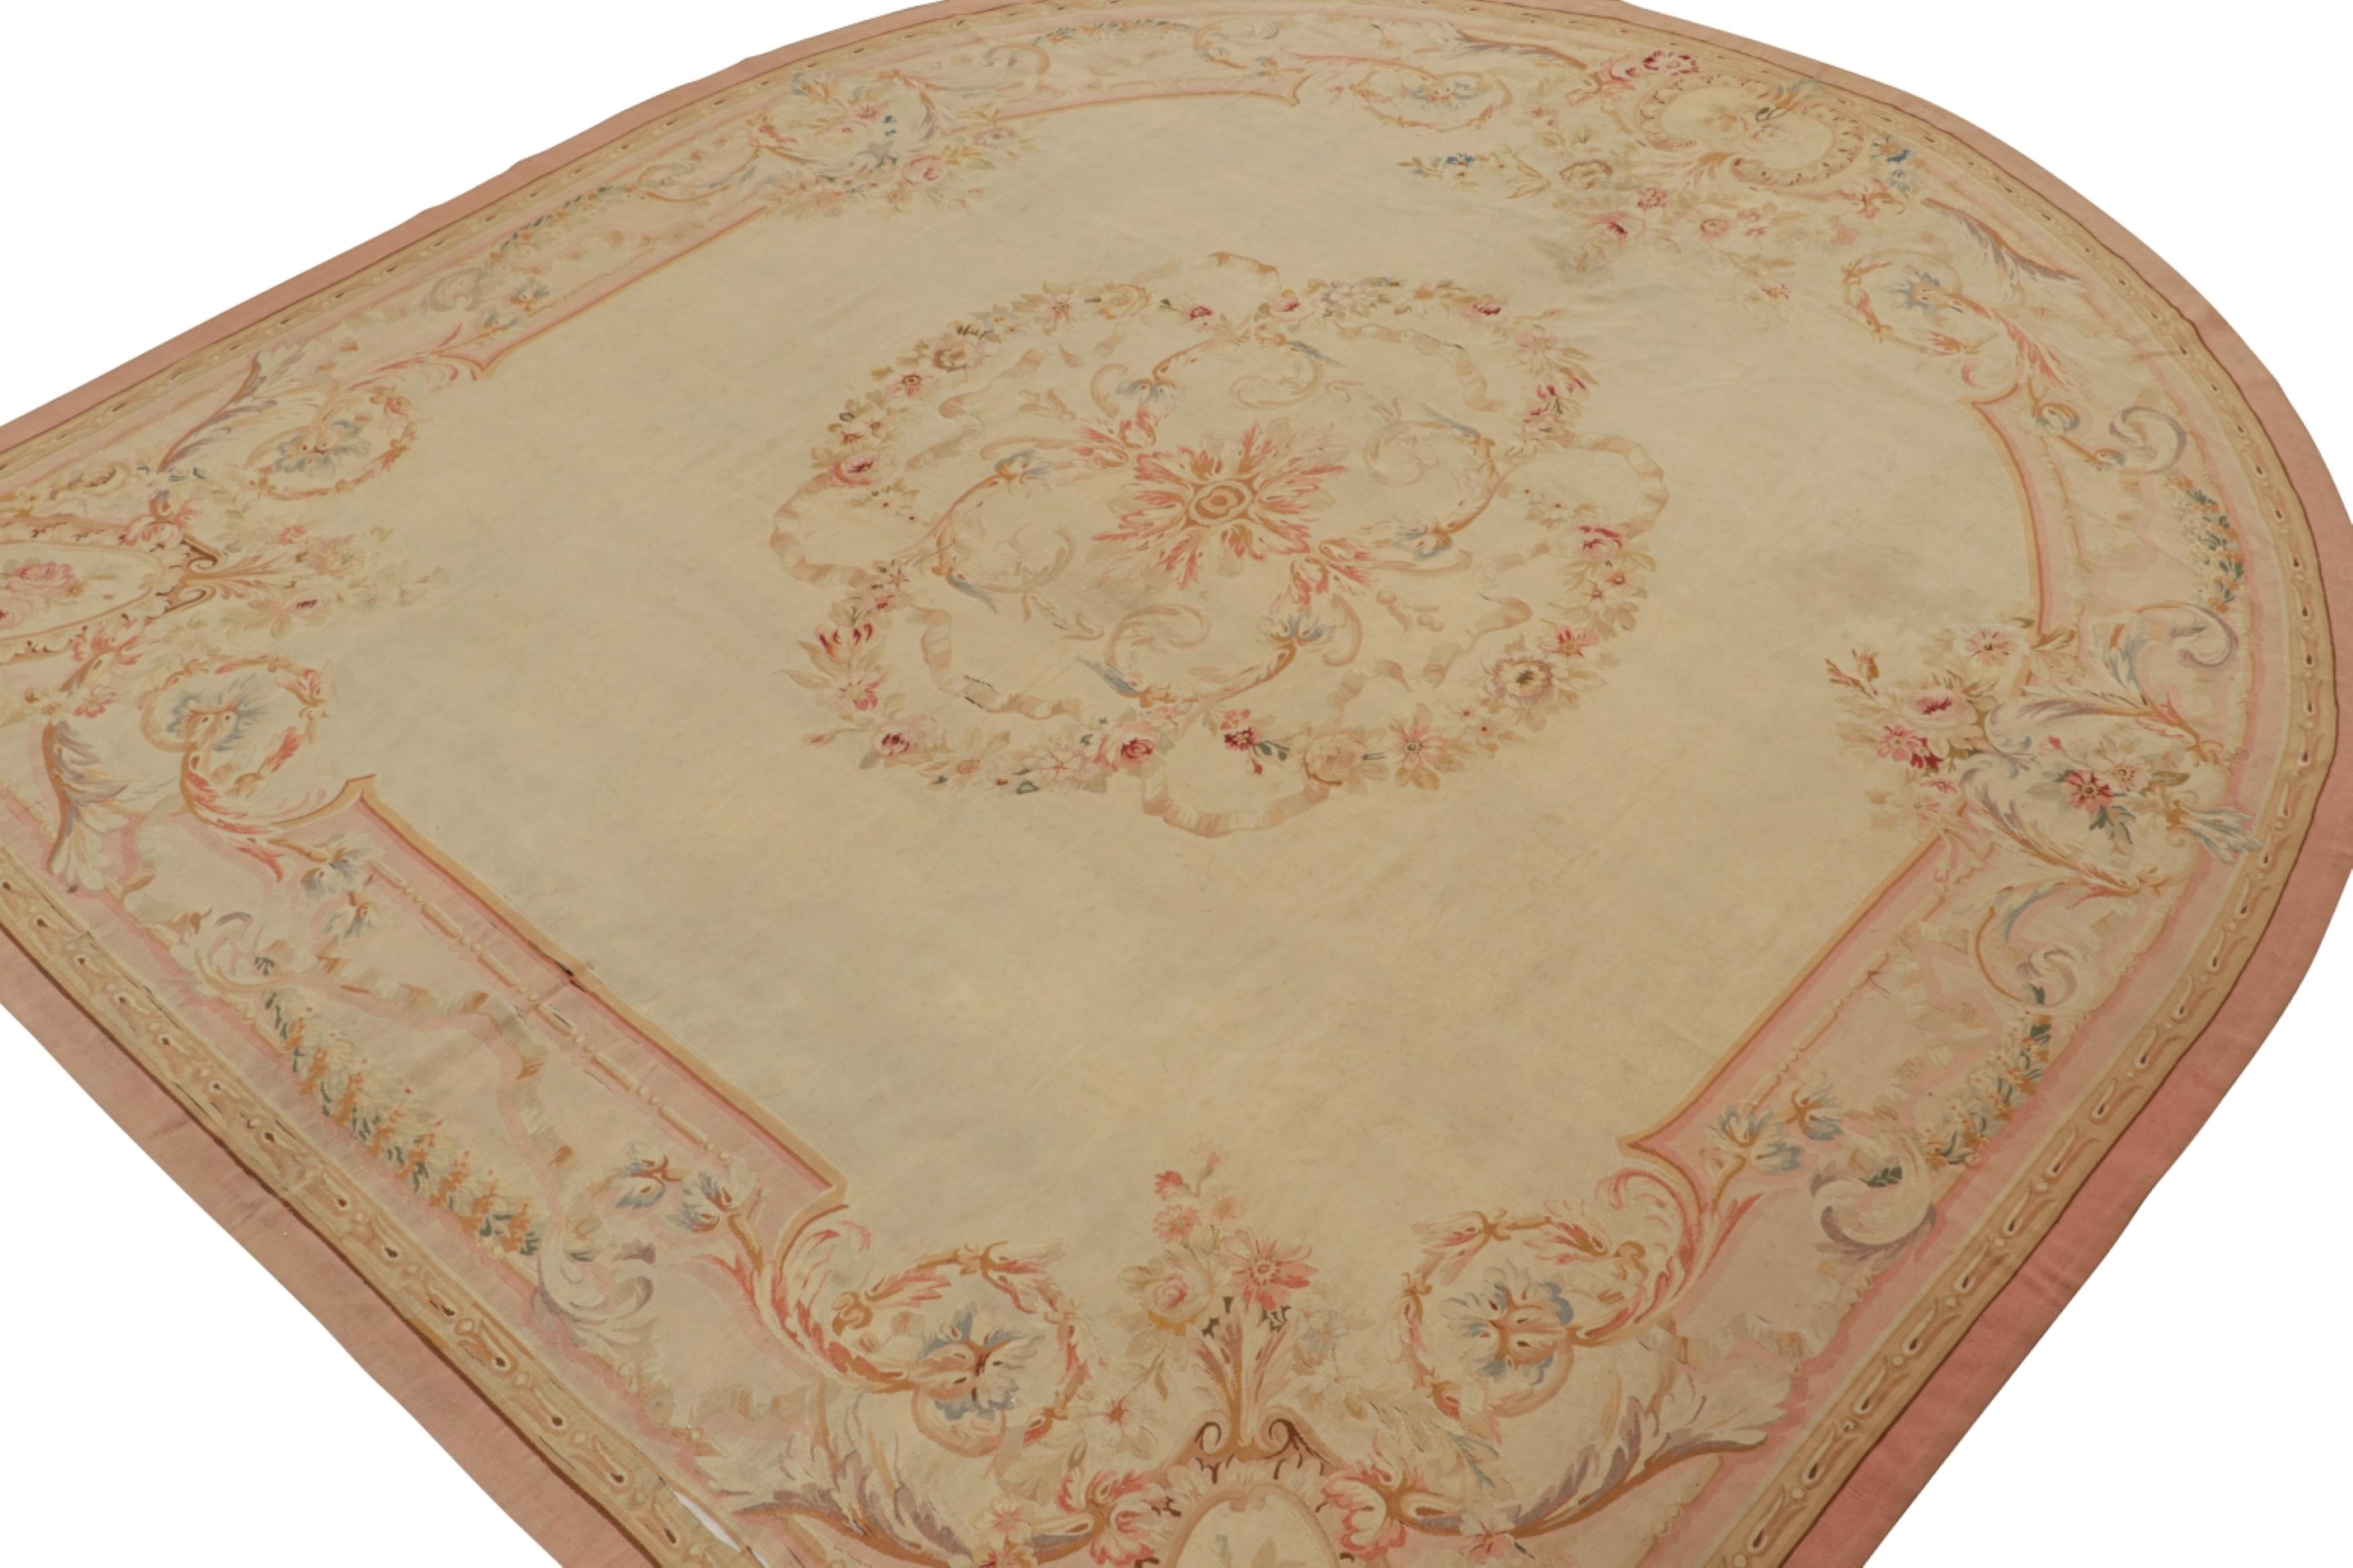 Handwoven in wool and hailing from France circa 1890-1900, this 11x12 antique Aubusson flatweave and round rug is an exciting addition in the Rug & Kilim Collection. An extremely collectible tapestry-style piece of this provenance, its design enjoys